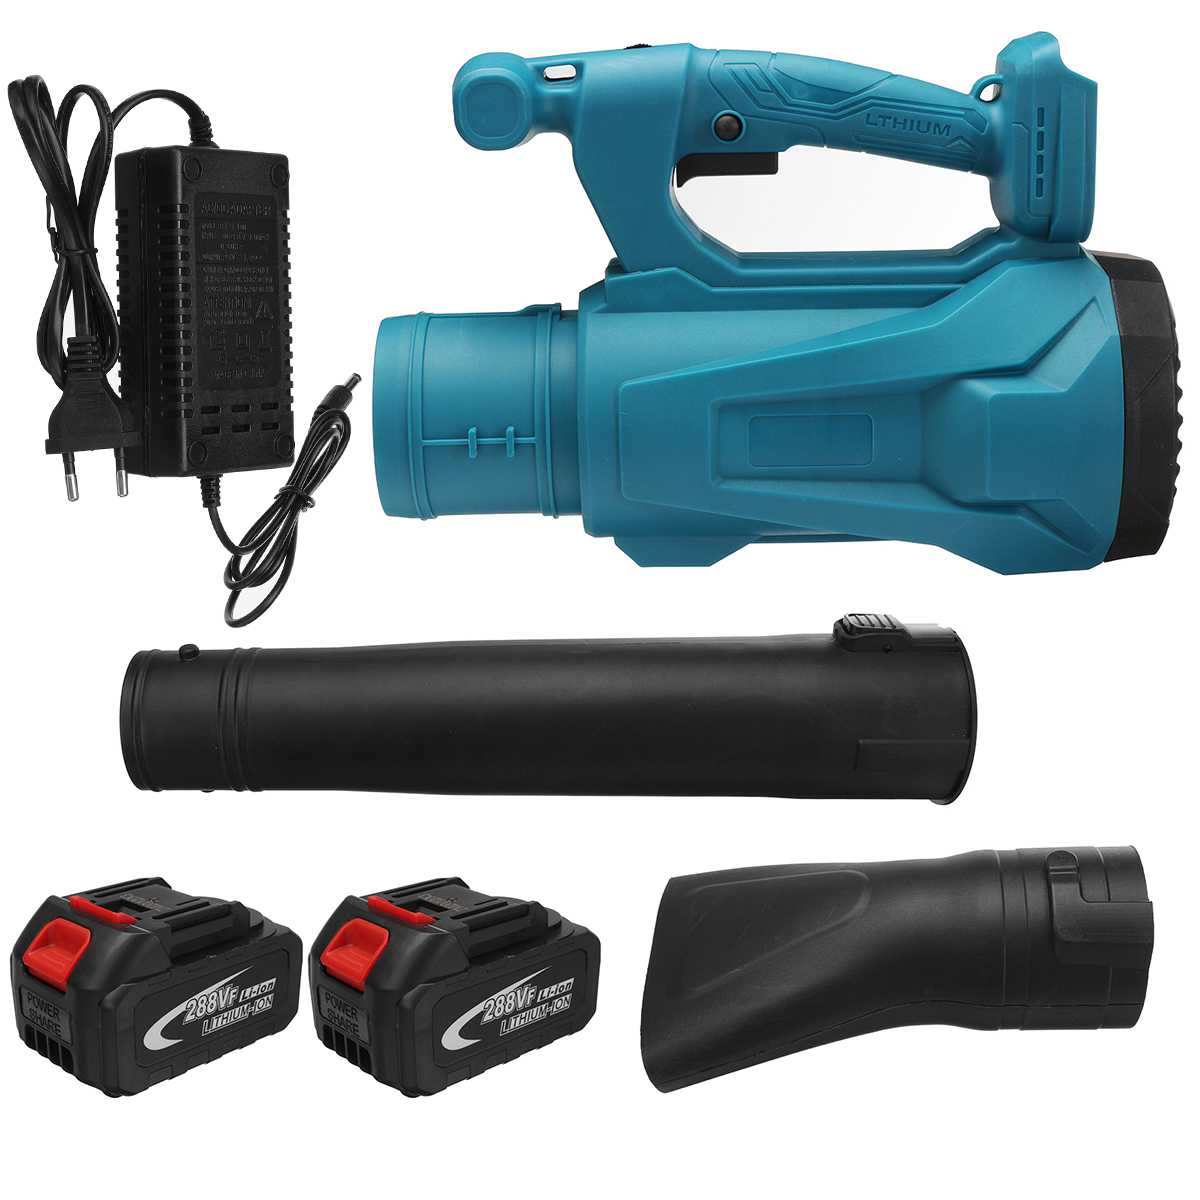 Cordless-Electric-Air-Blower-Vacuum-Cleaning-Dust-Collector-Cleaner-Leaf-Blower-W-None-or1or2-Batter-1879557-12